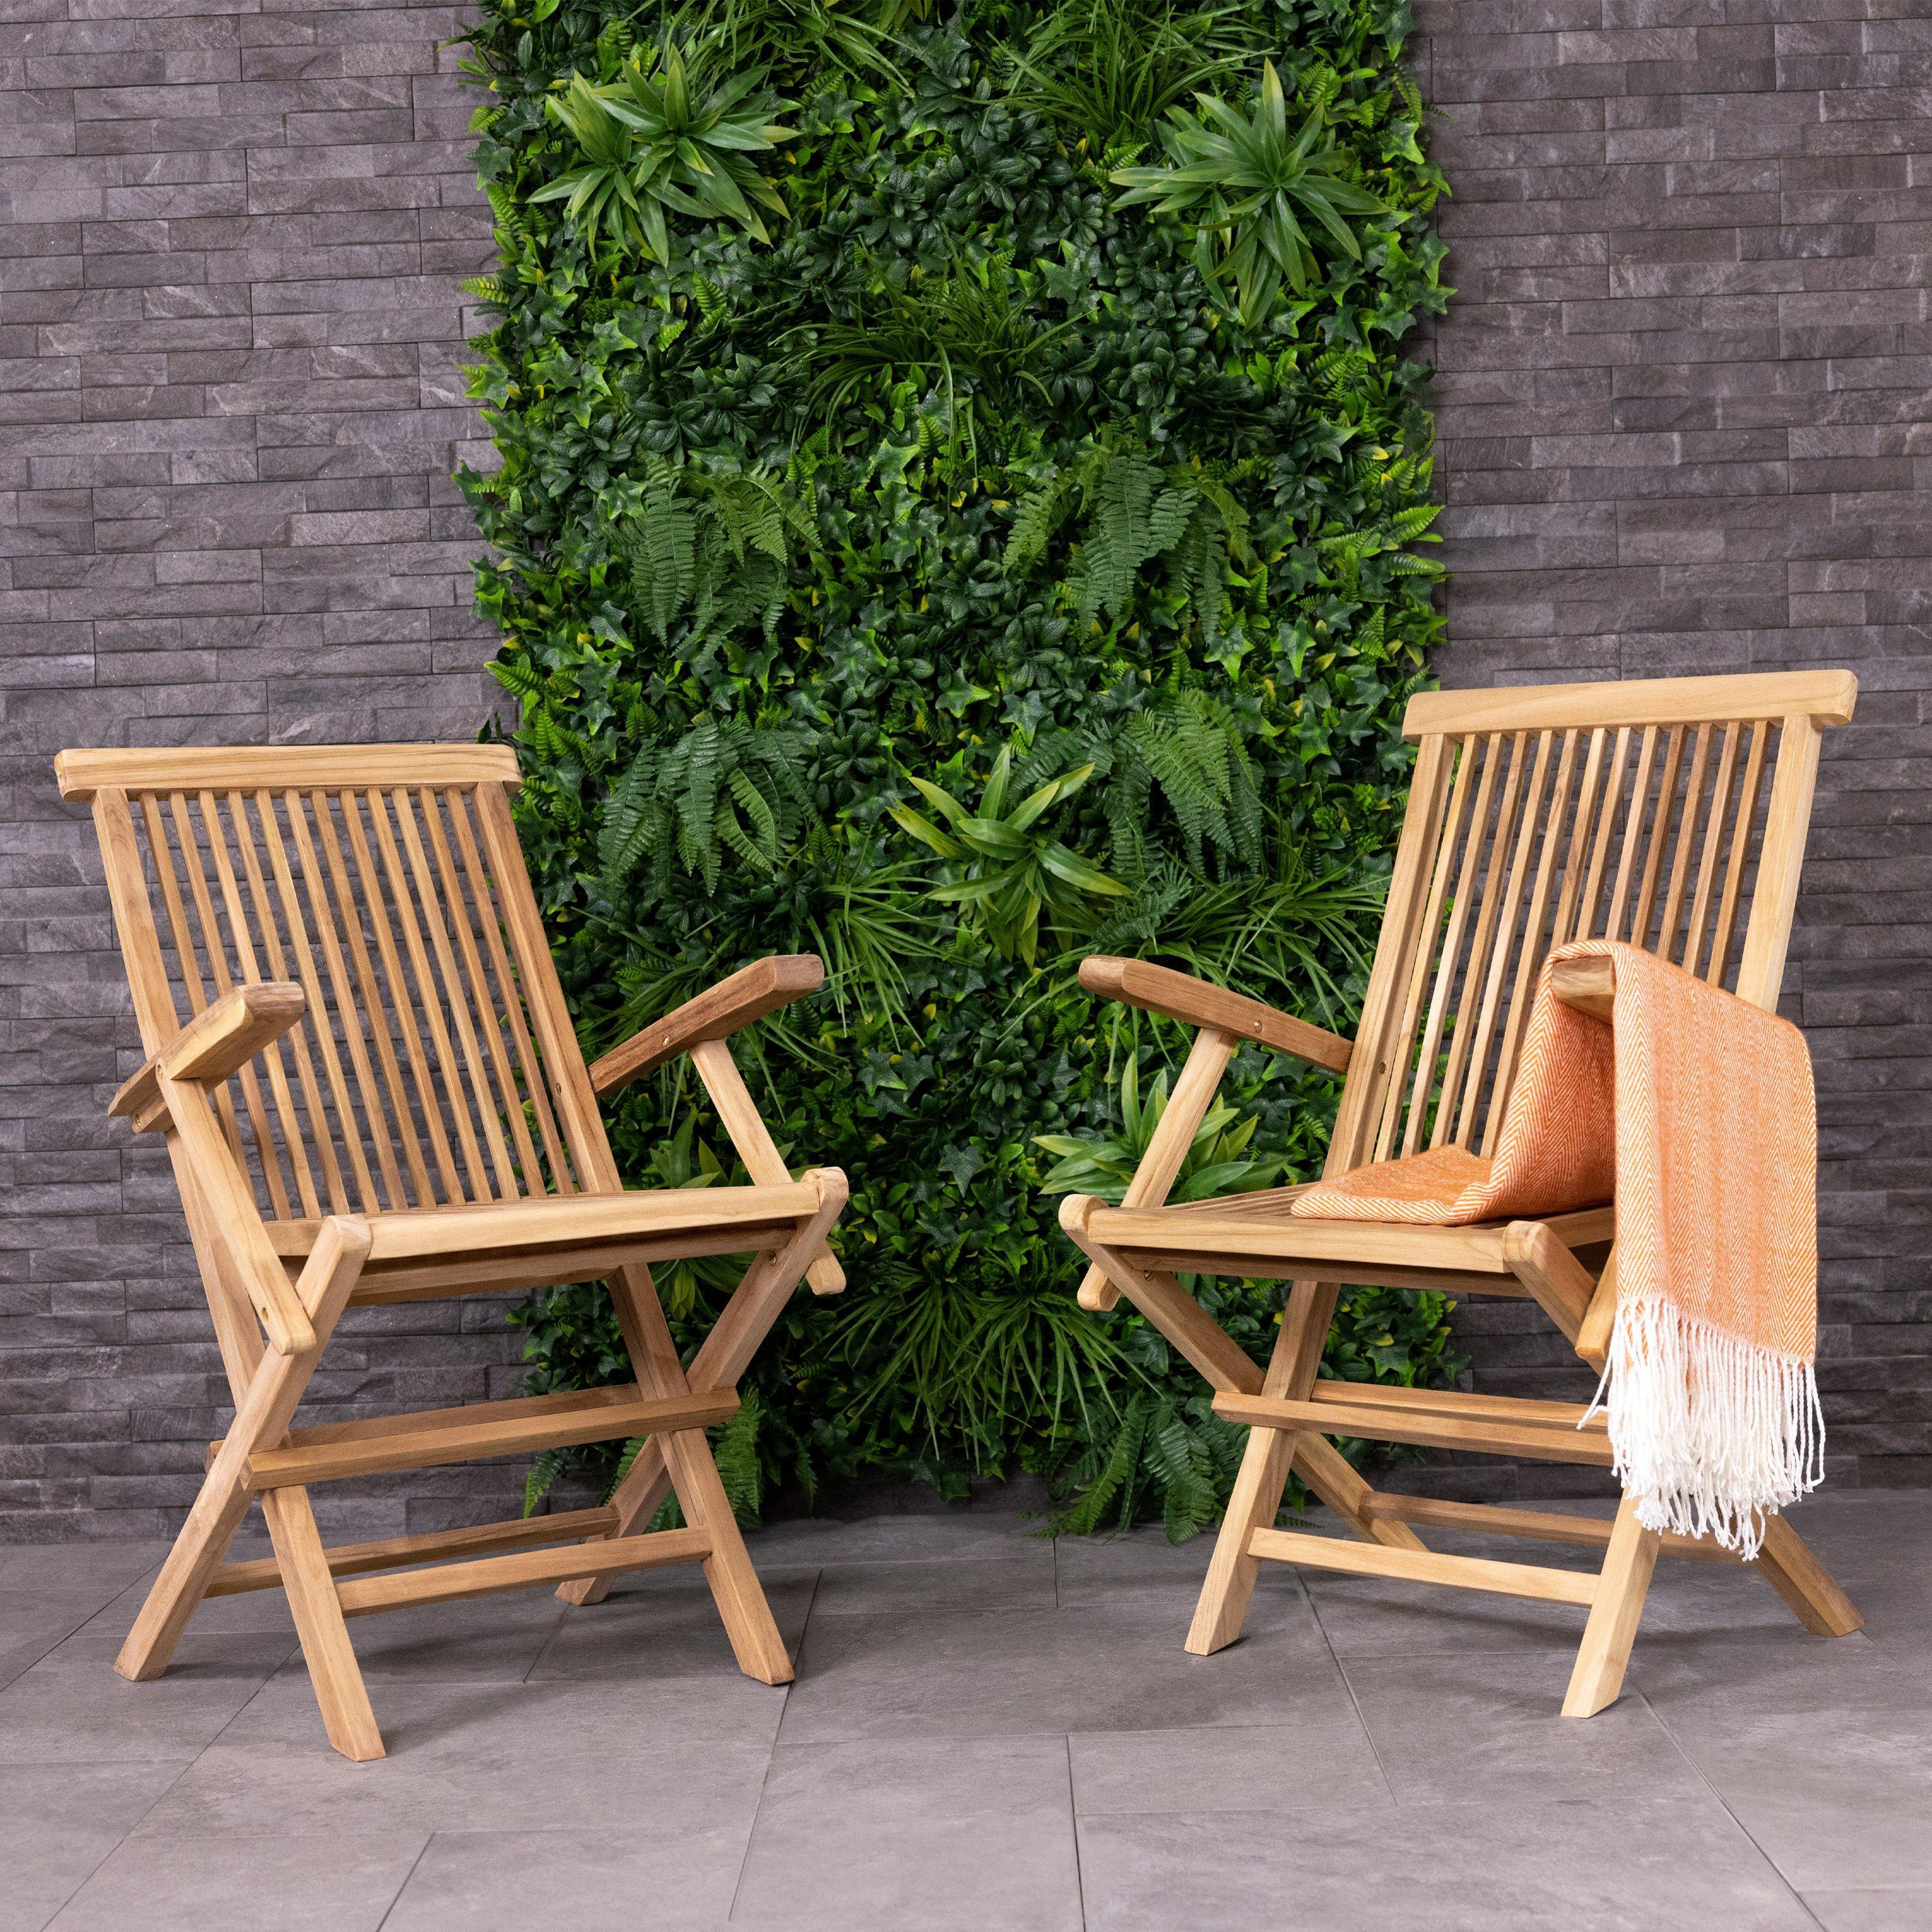 Pair of Solid Wooden Teak Garden Outdoor Folding Arm Chairs - image 1